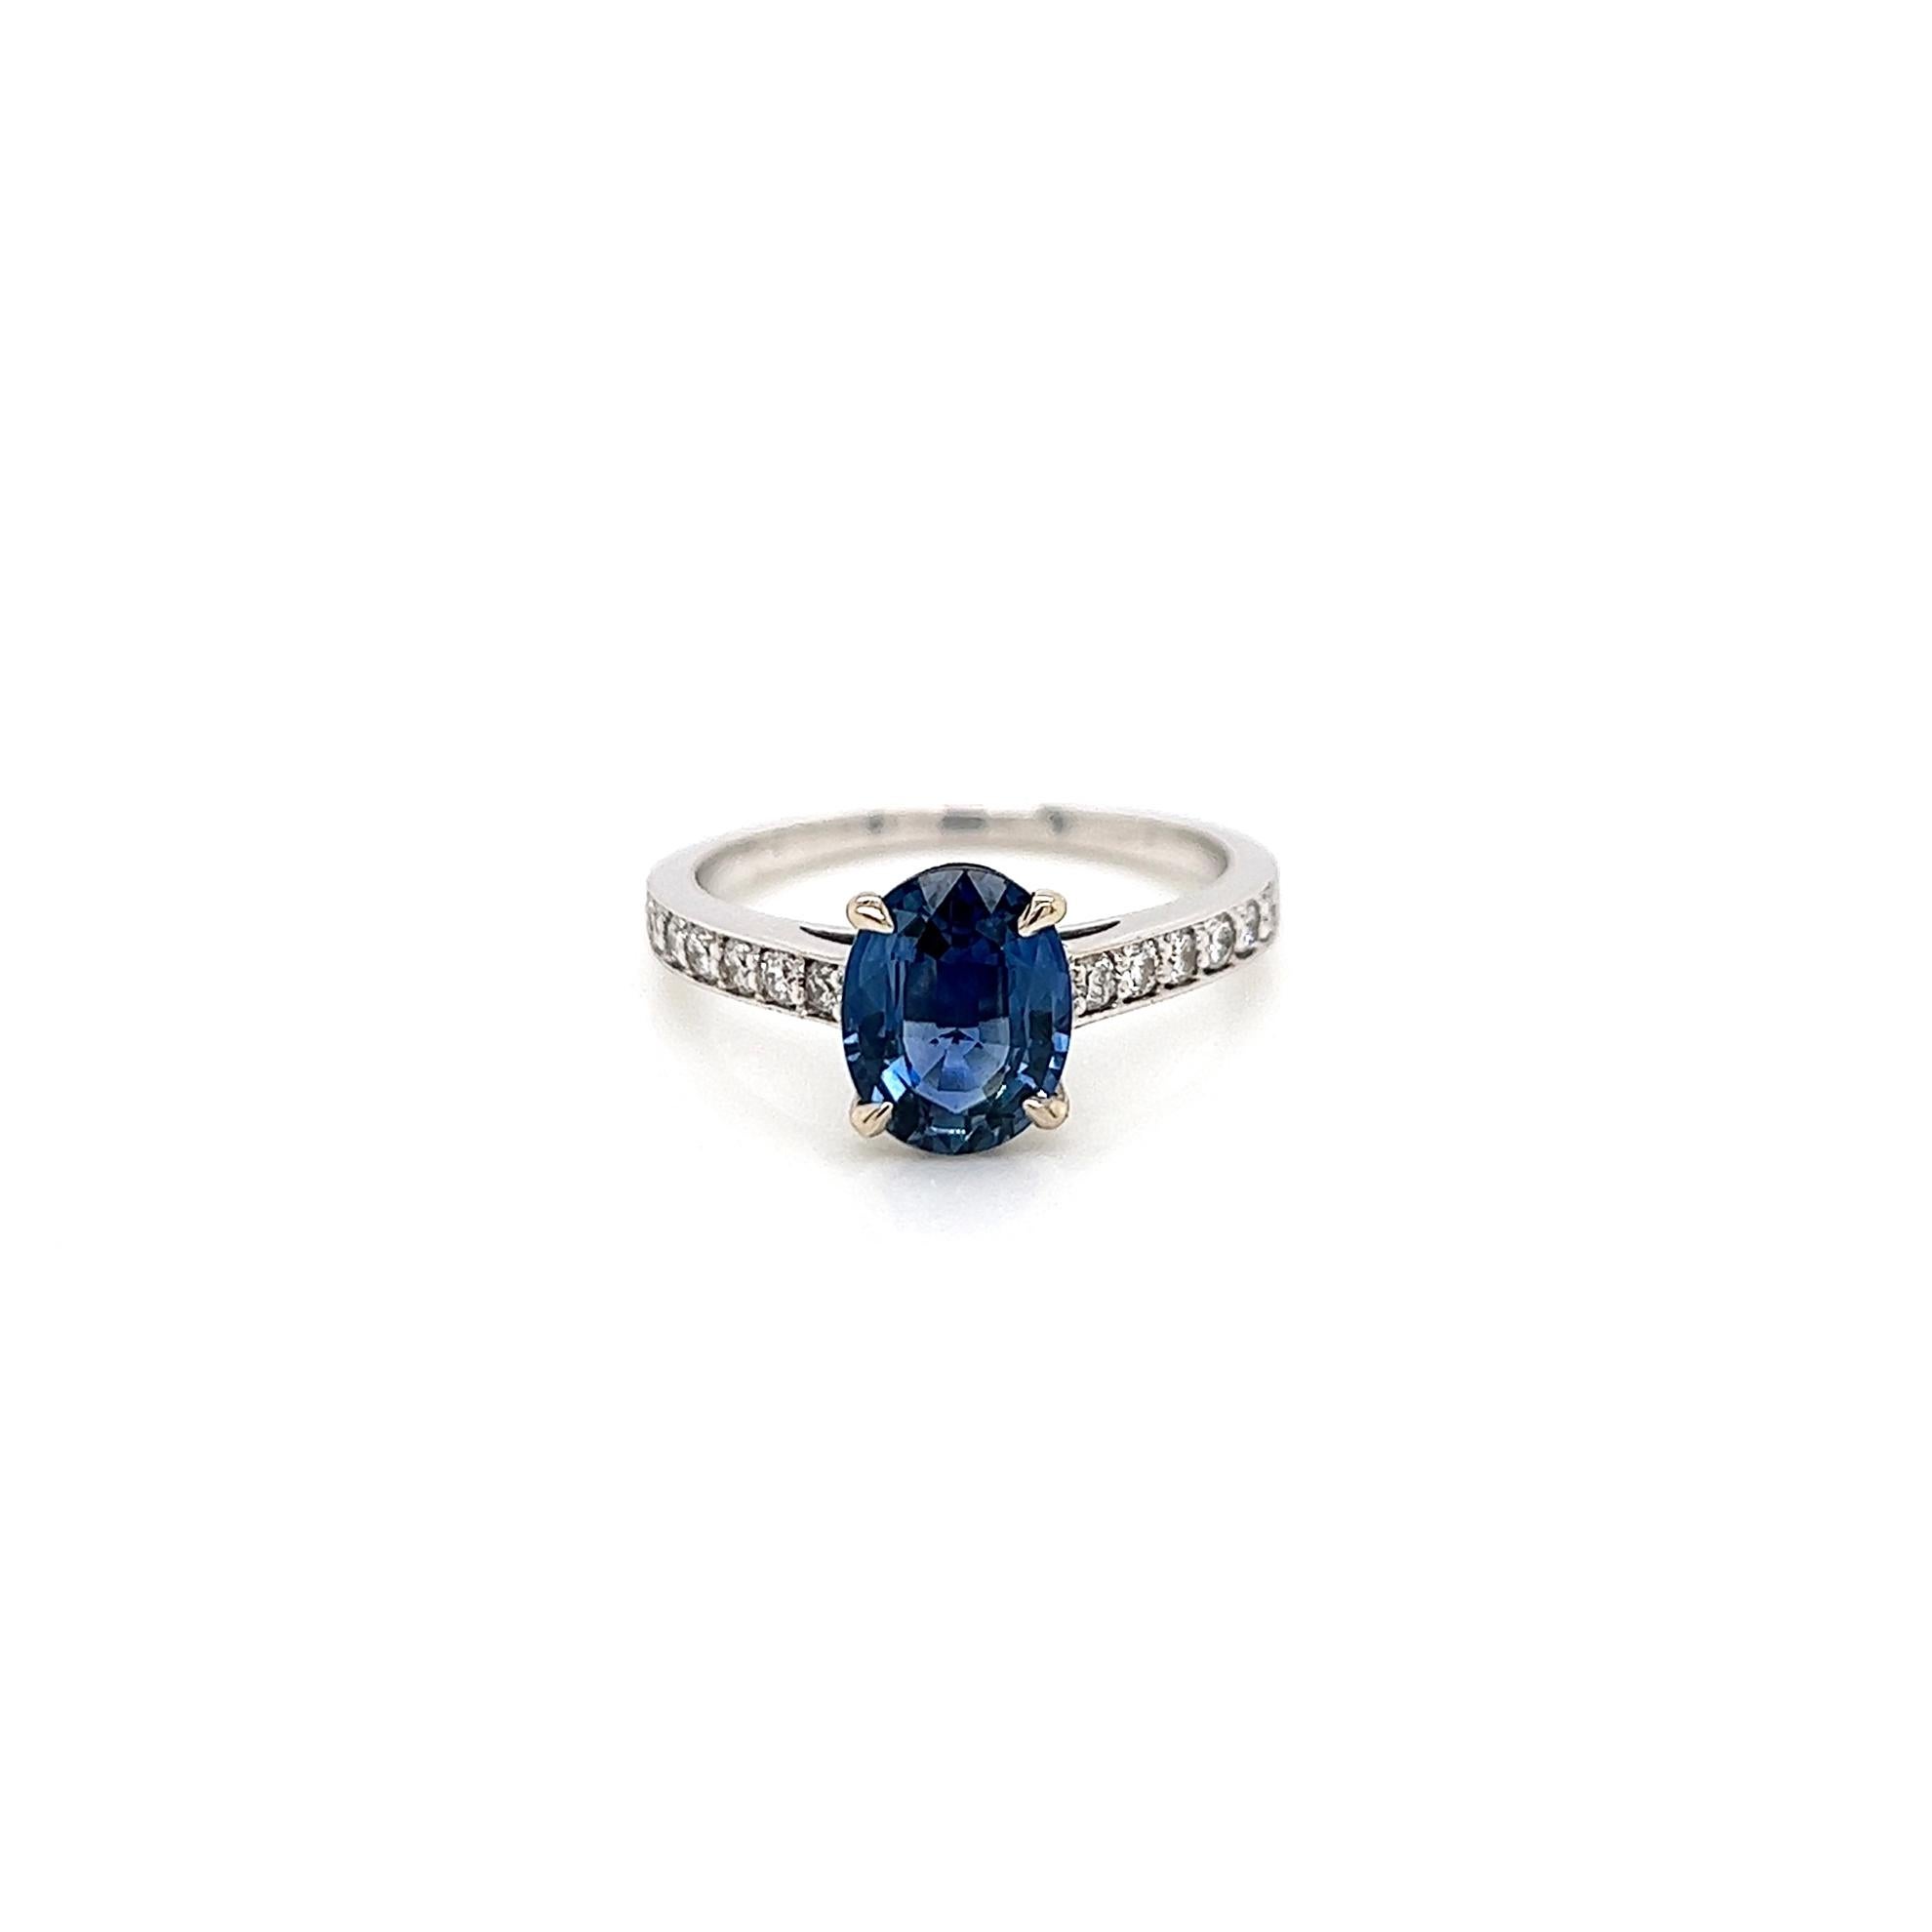 2.33 Total Carat Sapphire Diamond Engagement Ring

-Metal Type: 14K White Gold
-2.09 Carat Oval Brilliant Cut Blue Sapphire, GIA Certified 
-0.24 Carat Round Side Diamonds 
-Size 7.5
Resizable for an additional fee.

Made in New York City.